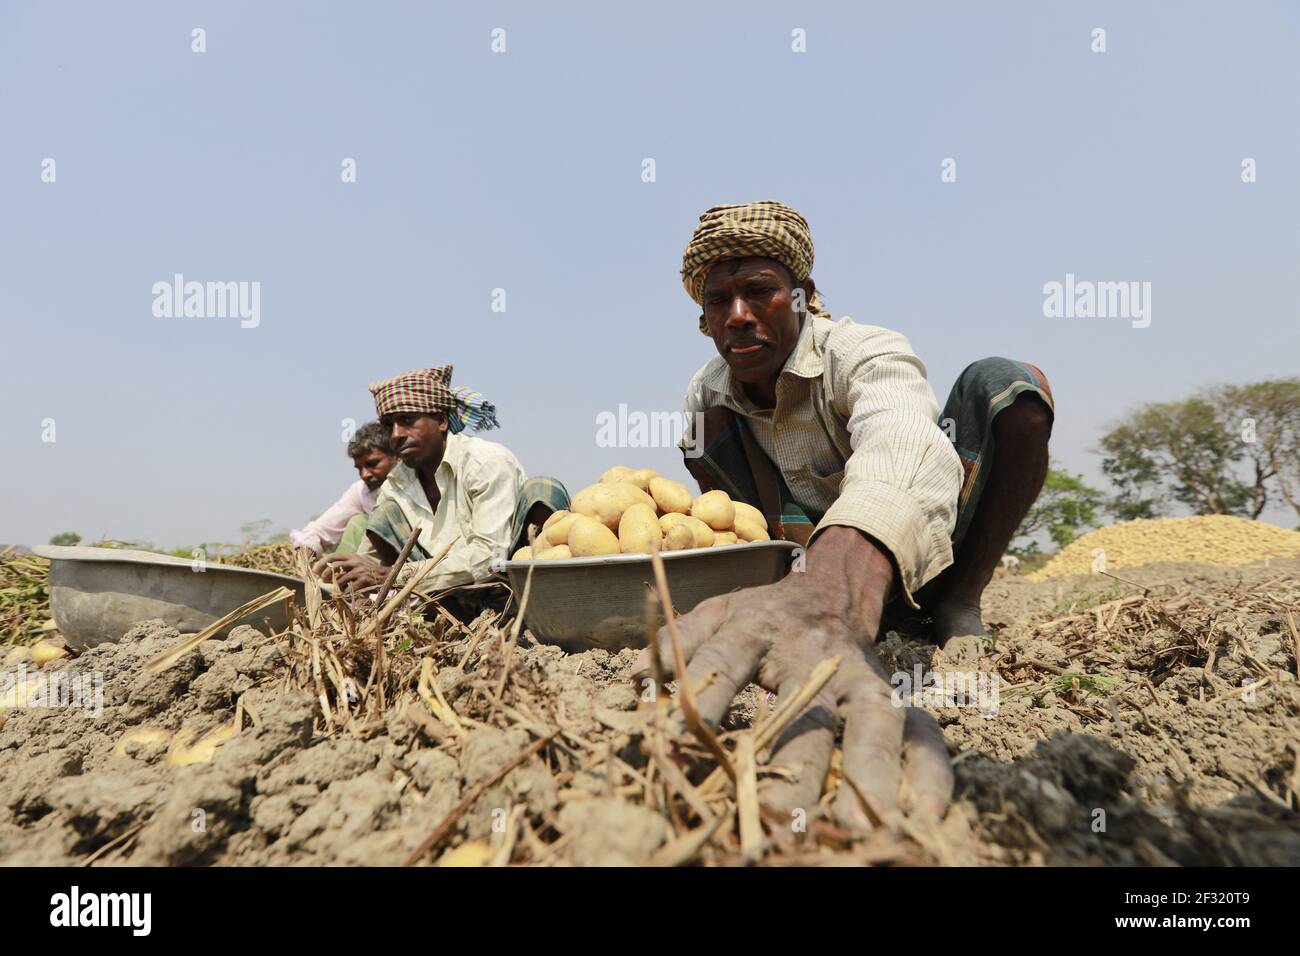 Bangladeshi people collect potatoes after harvest them from a field, in Munshigonj, near Dhaka, Bangladesh, March 14, 2021. As the winter season draws to an end, the farmers get busy harvesting potatoes from the fields. Following a bumper production of potatoes this year, the farmers are now waiting to get a fair price for their harvests. Photo by Suvra Kanti Das/ABACAPRESS.COM Stock Photo